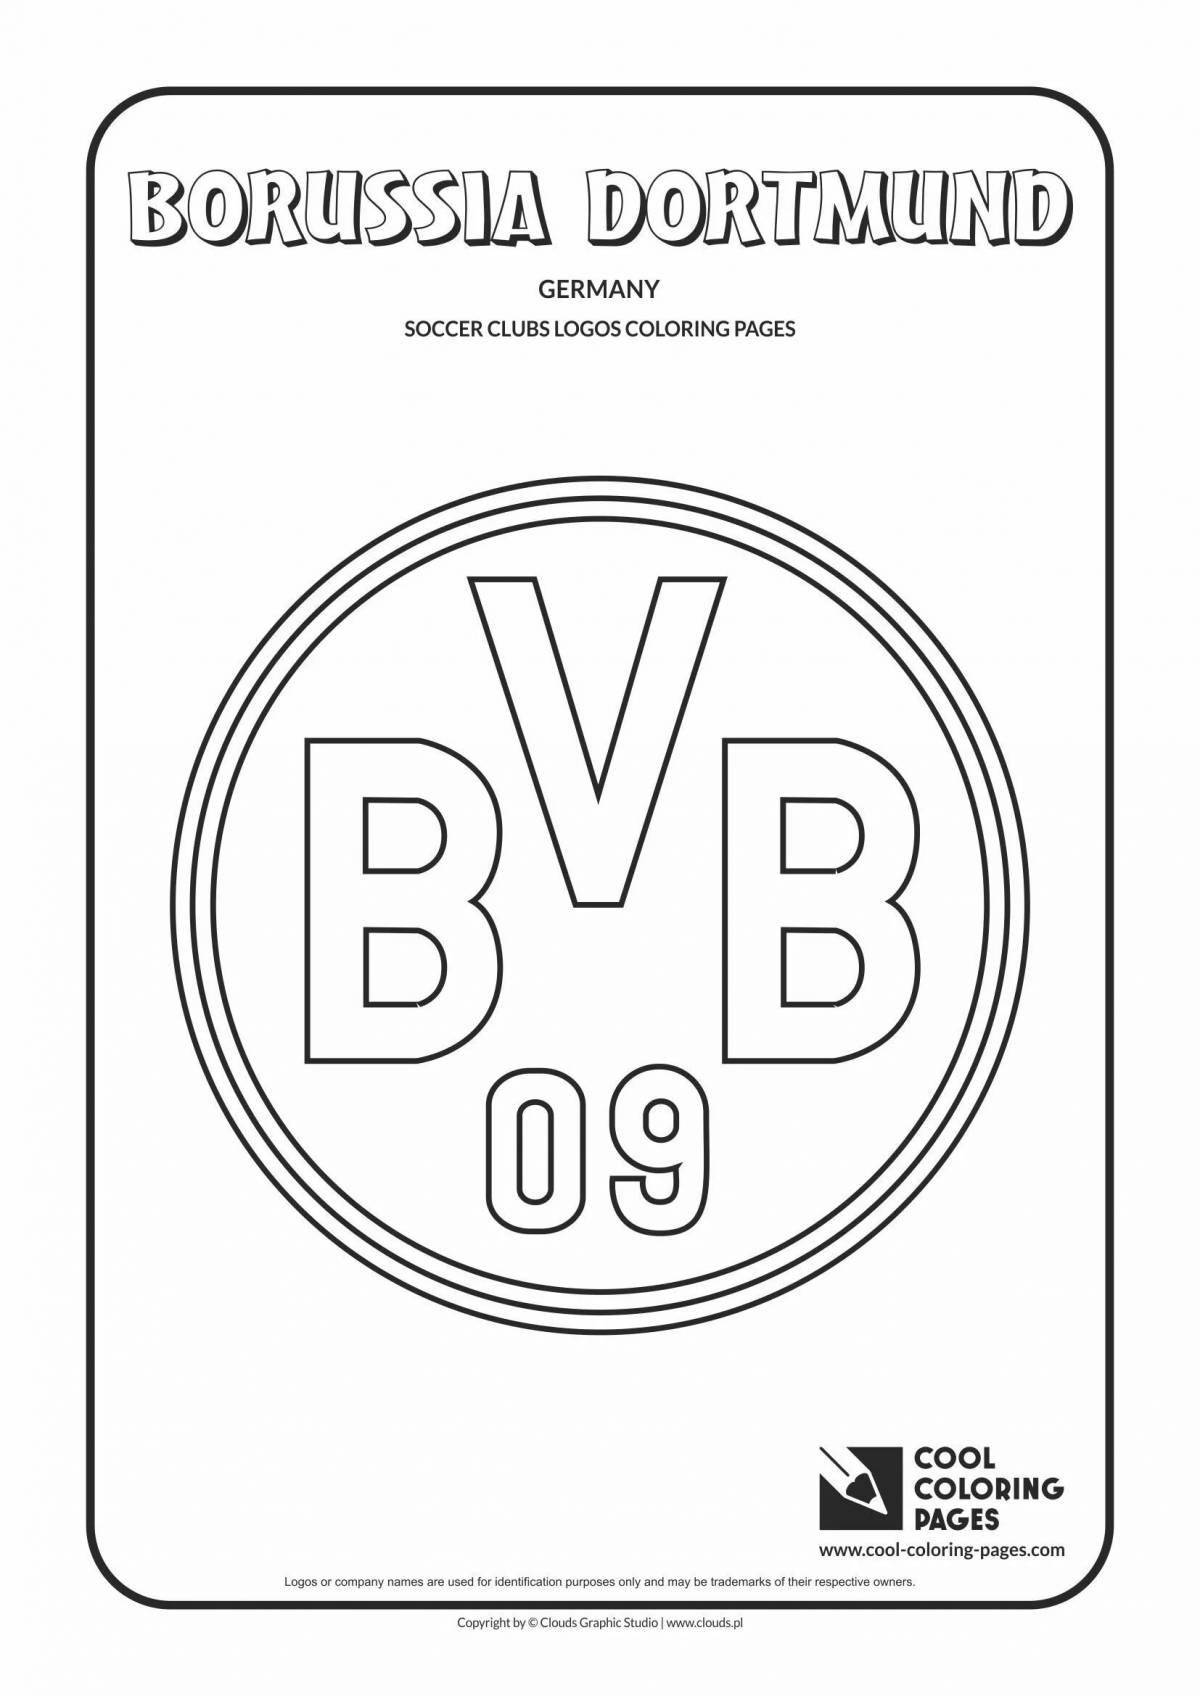 Artistically created psg logo coloring page